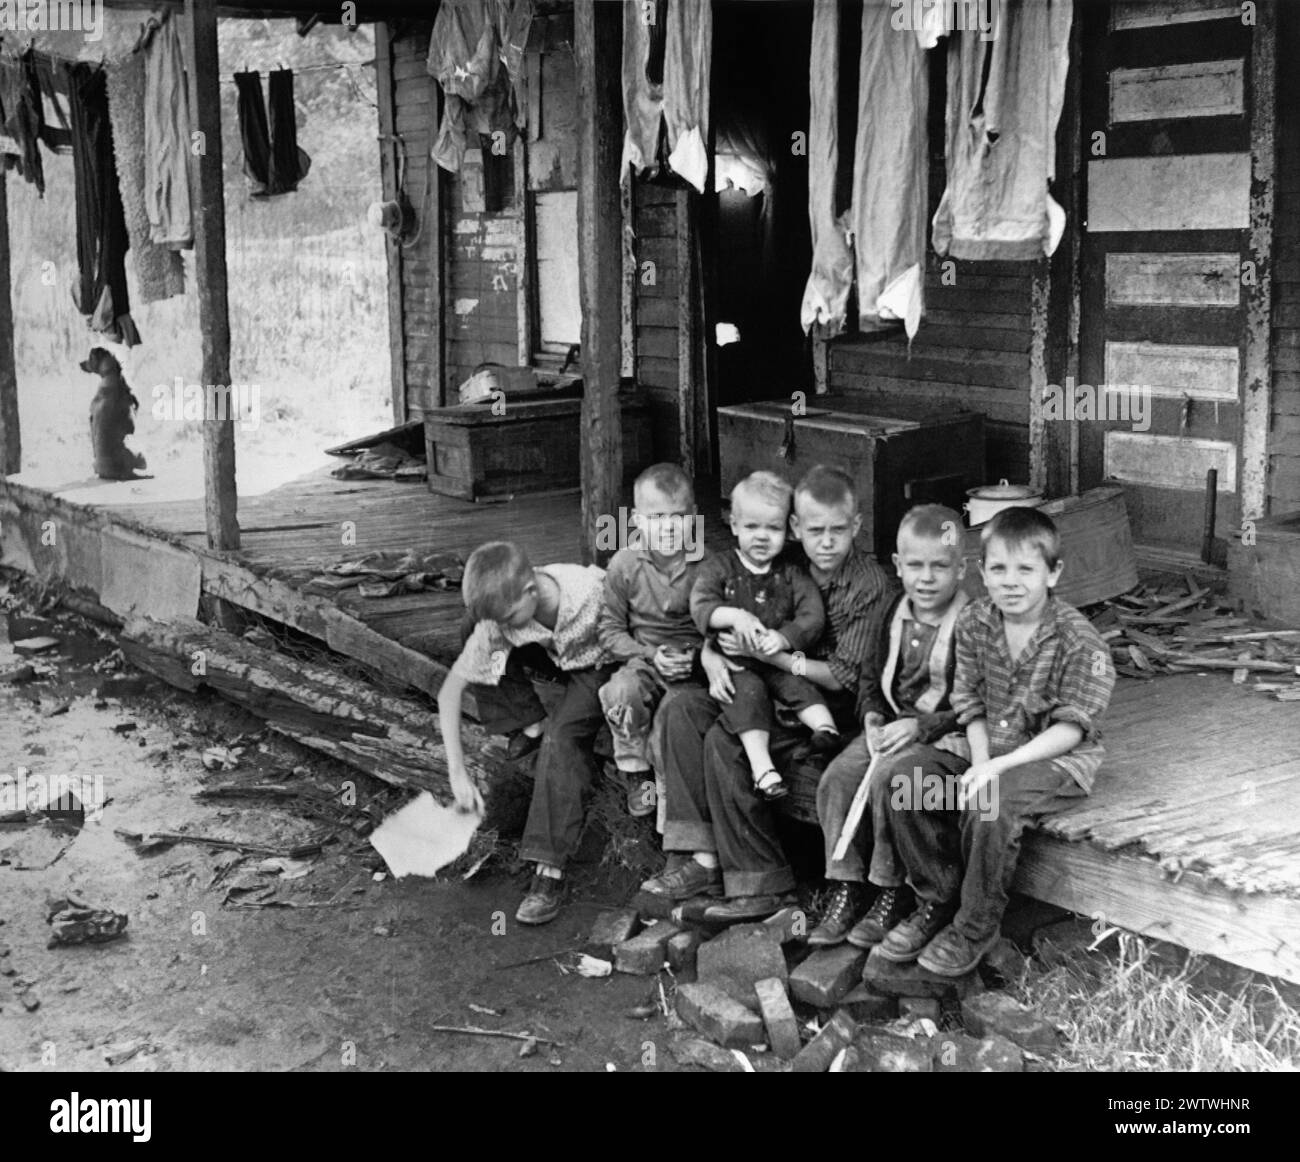 Six young boys sitting in a group on the front porch of a dilapidated home in an Eastern Kentucky mining community Stock Photo